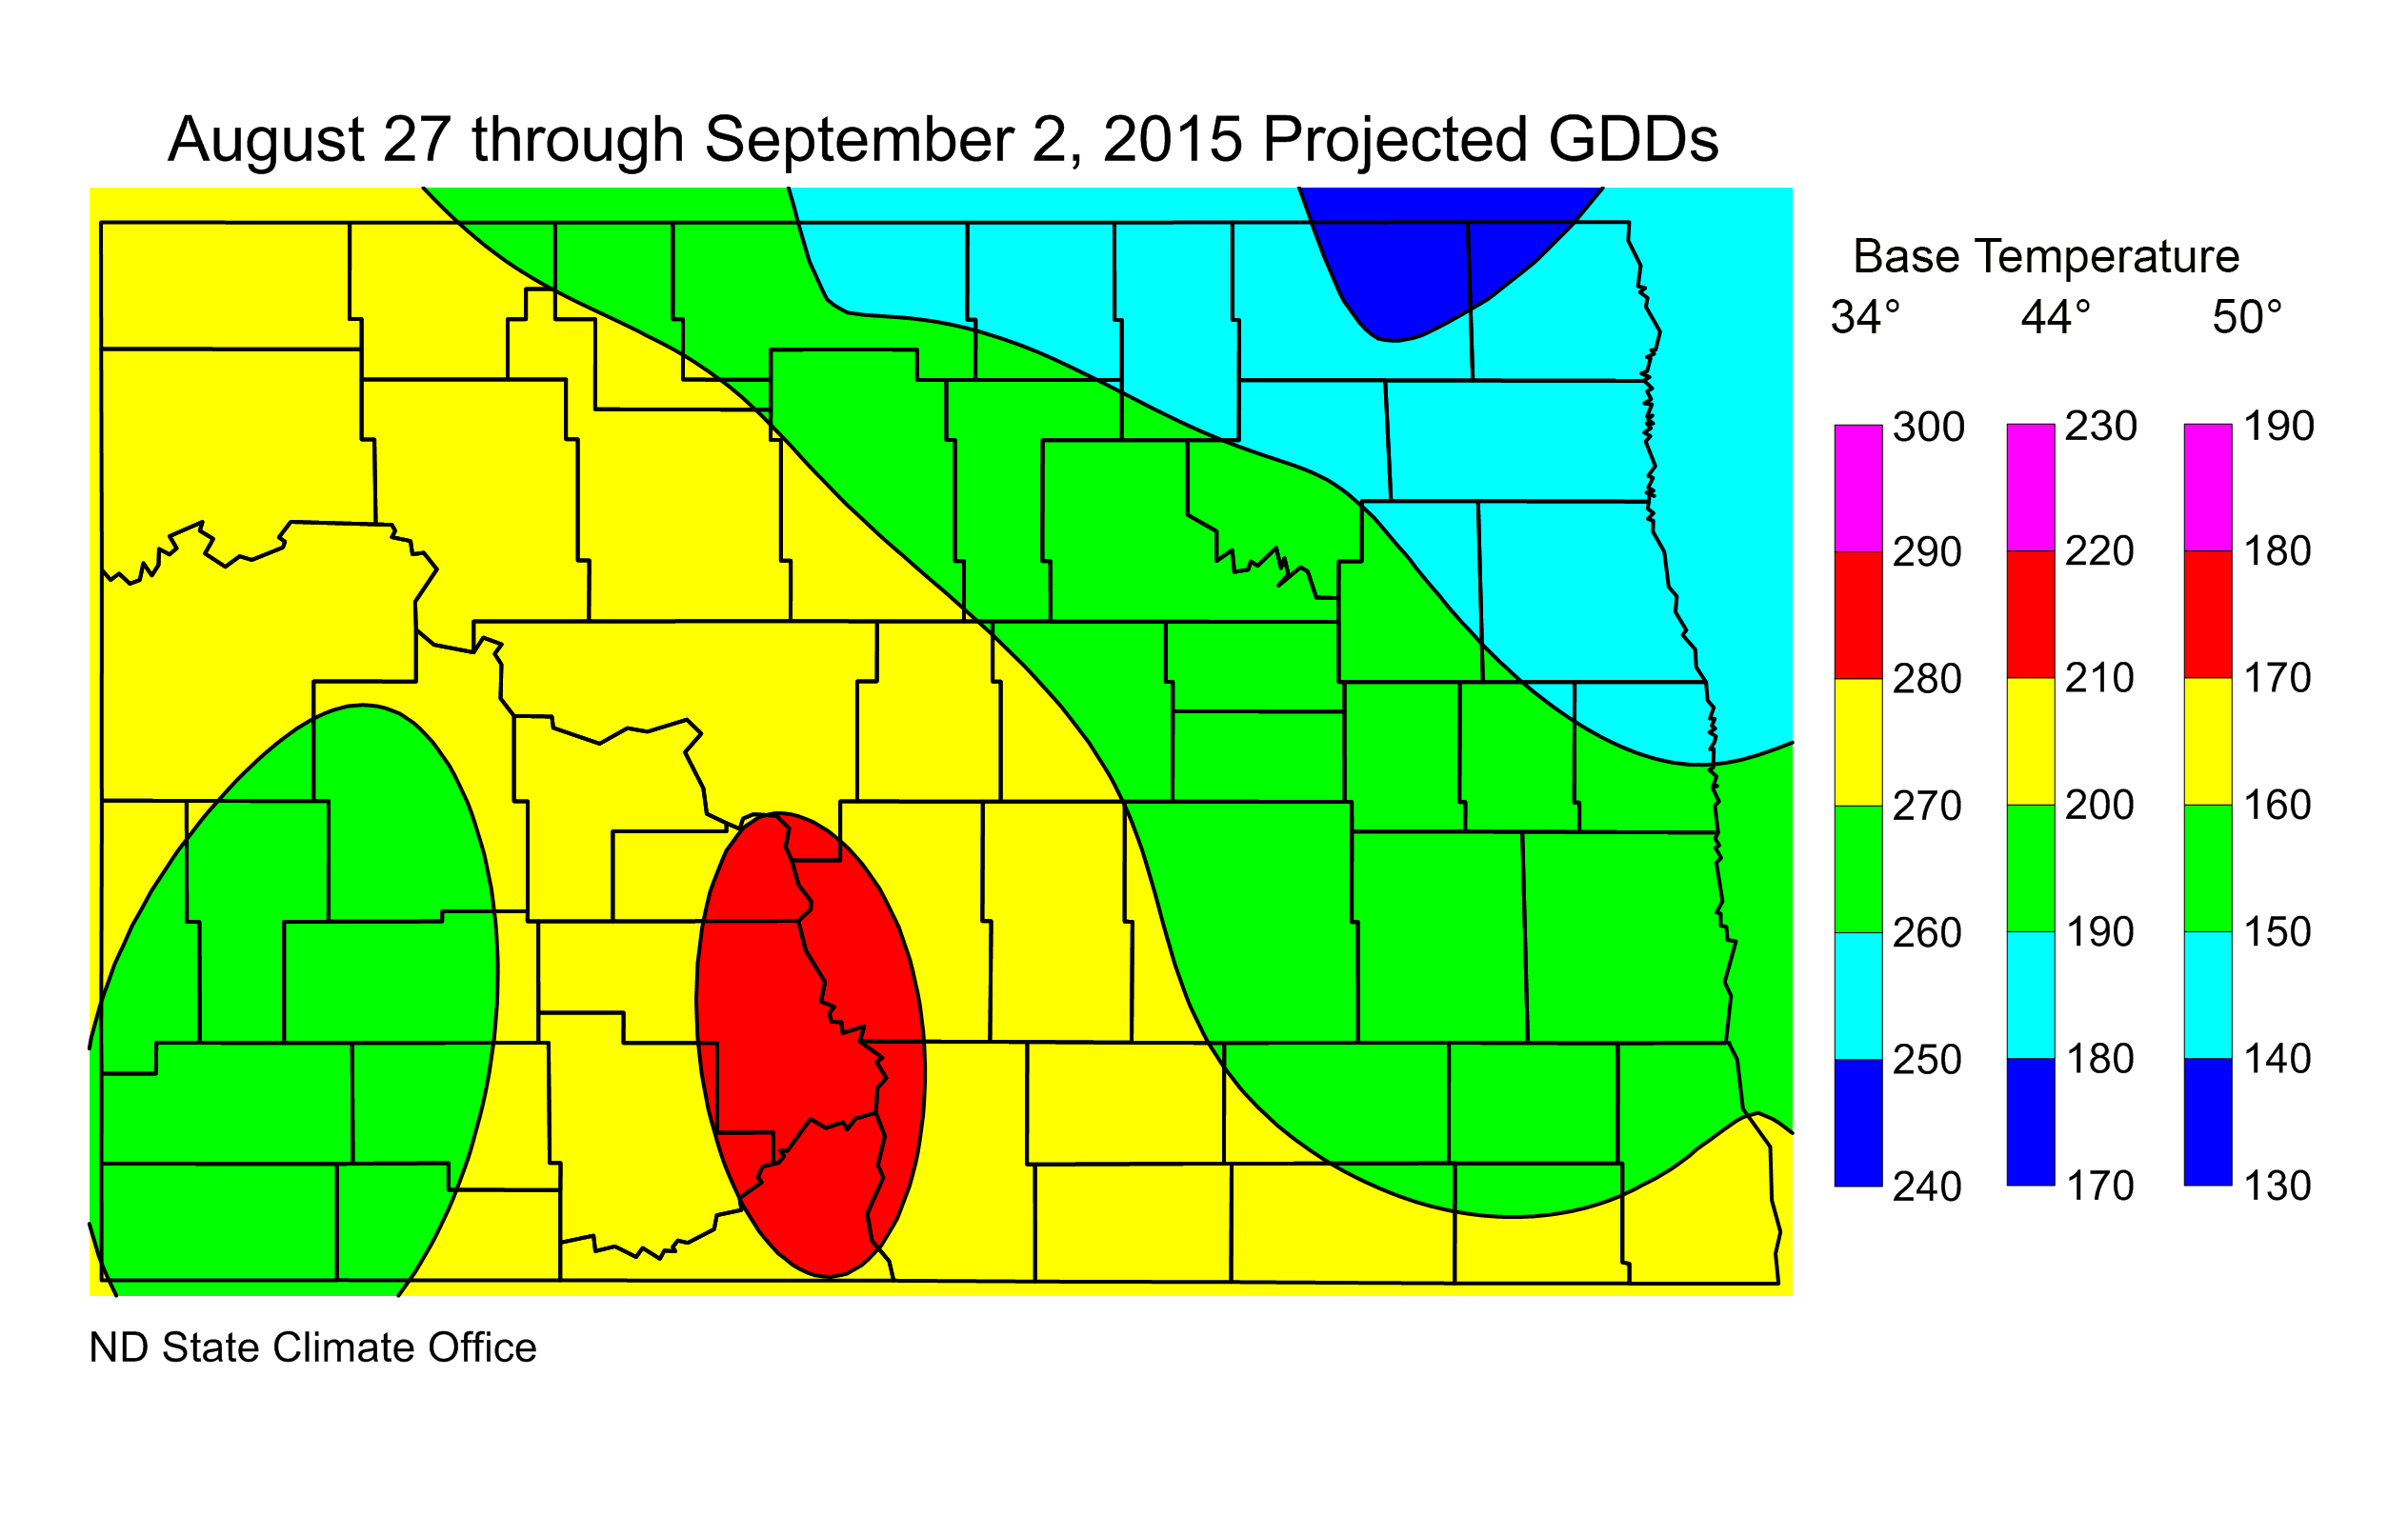 Figure 2. Projected Growing Degree Days from August 27 through September 2, 2015